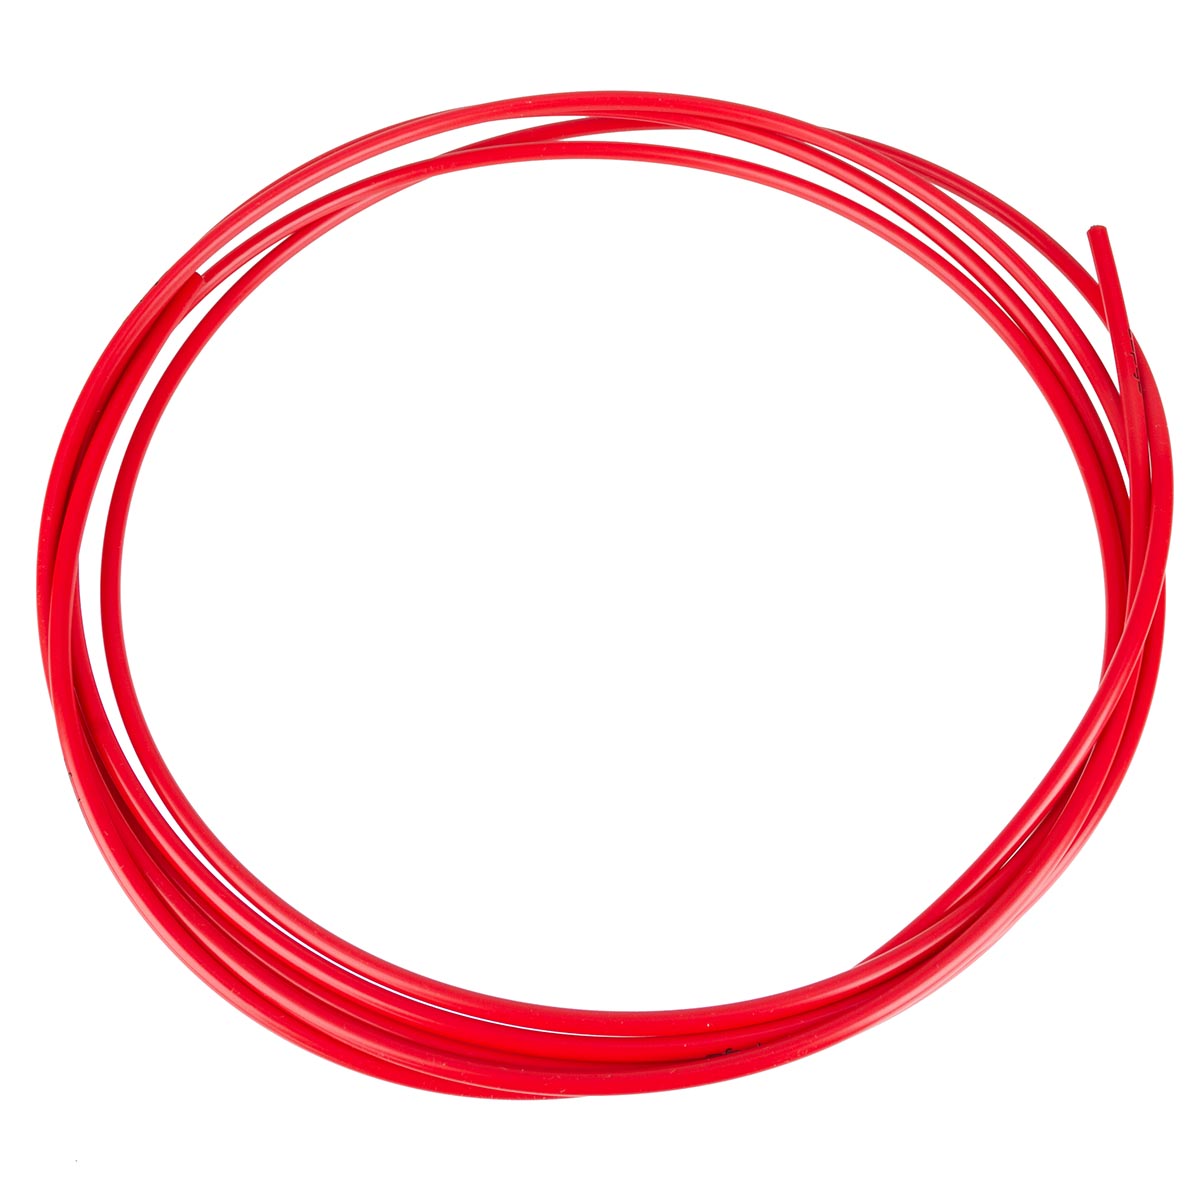 Capgo Cable Systems Shift Cable Housing Blue Line Tomato Red